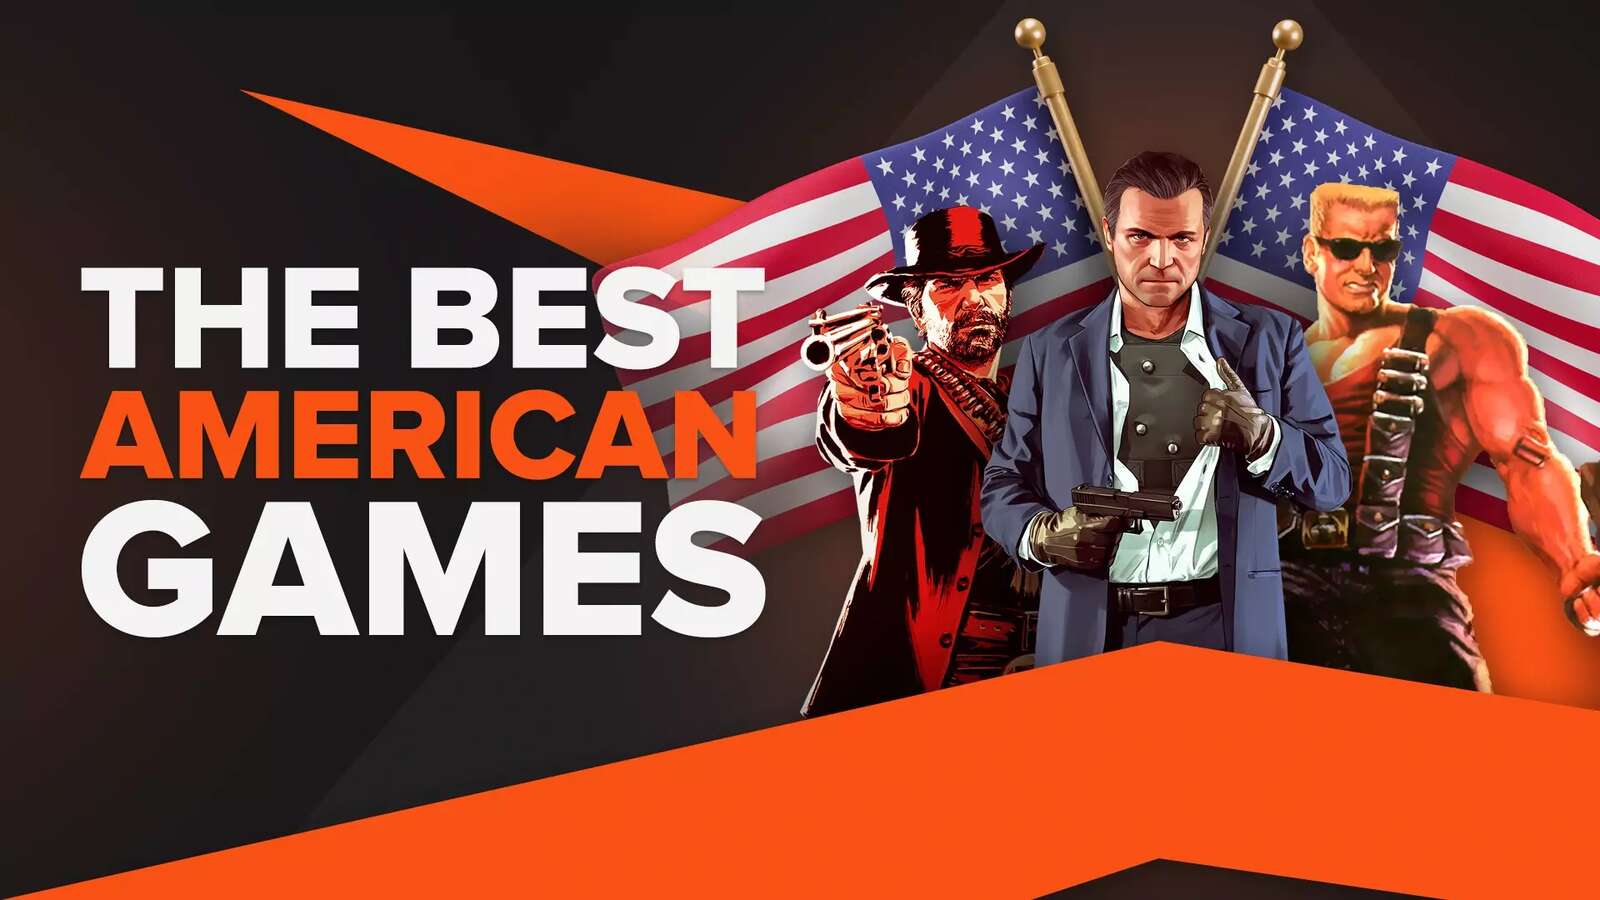 The 10 Best American Games to Chug Beers To